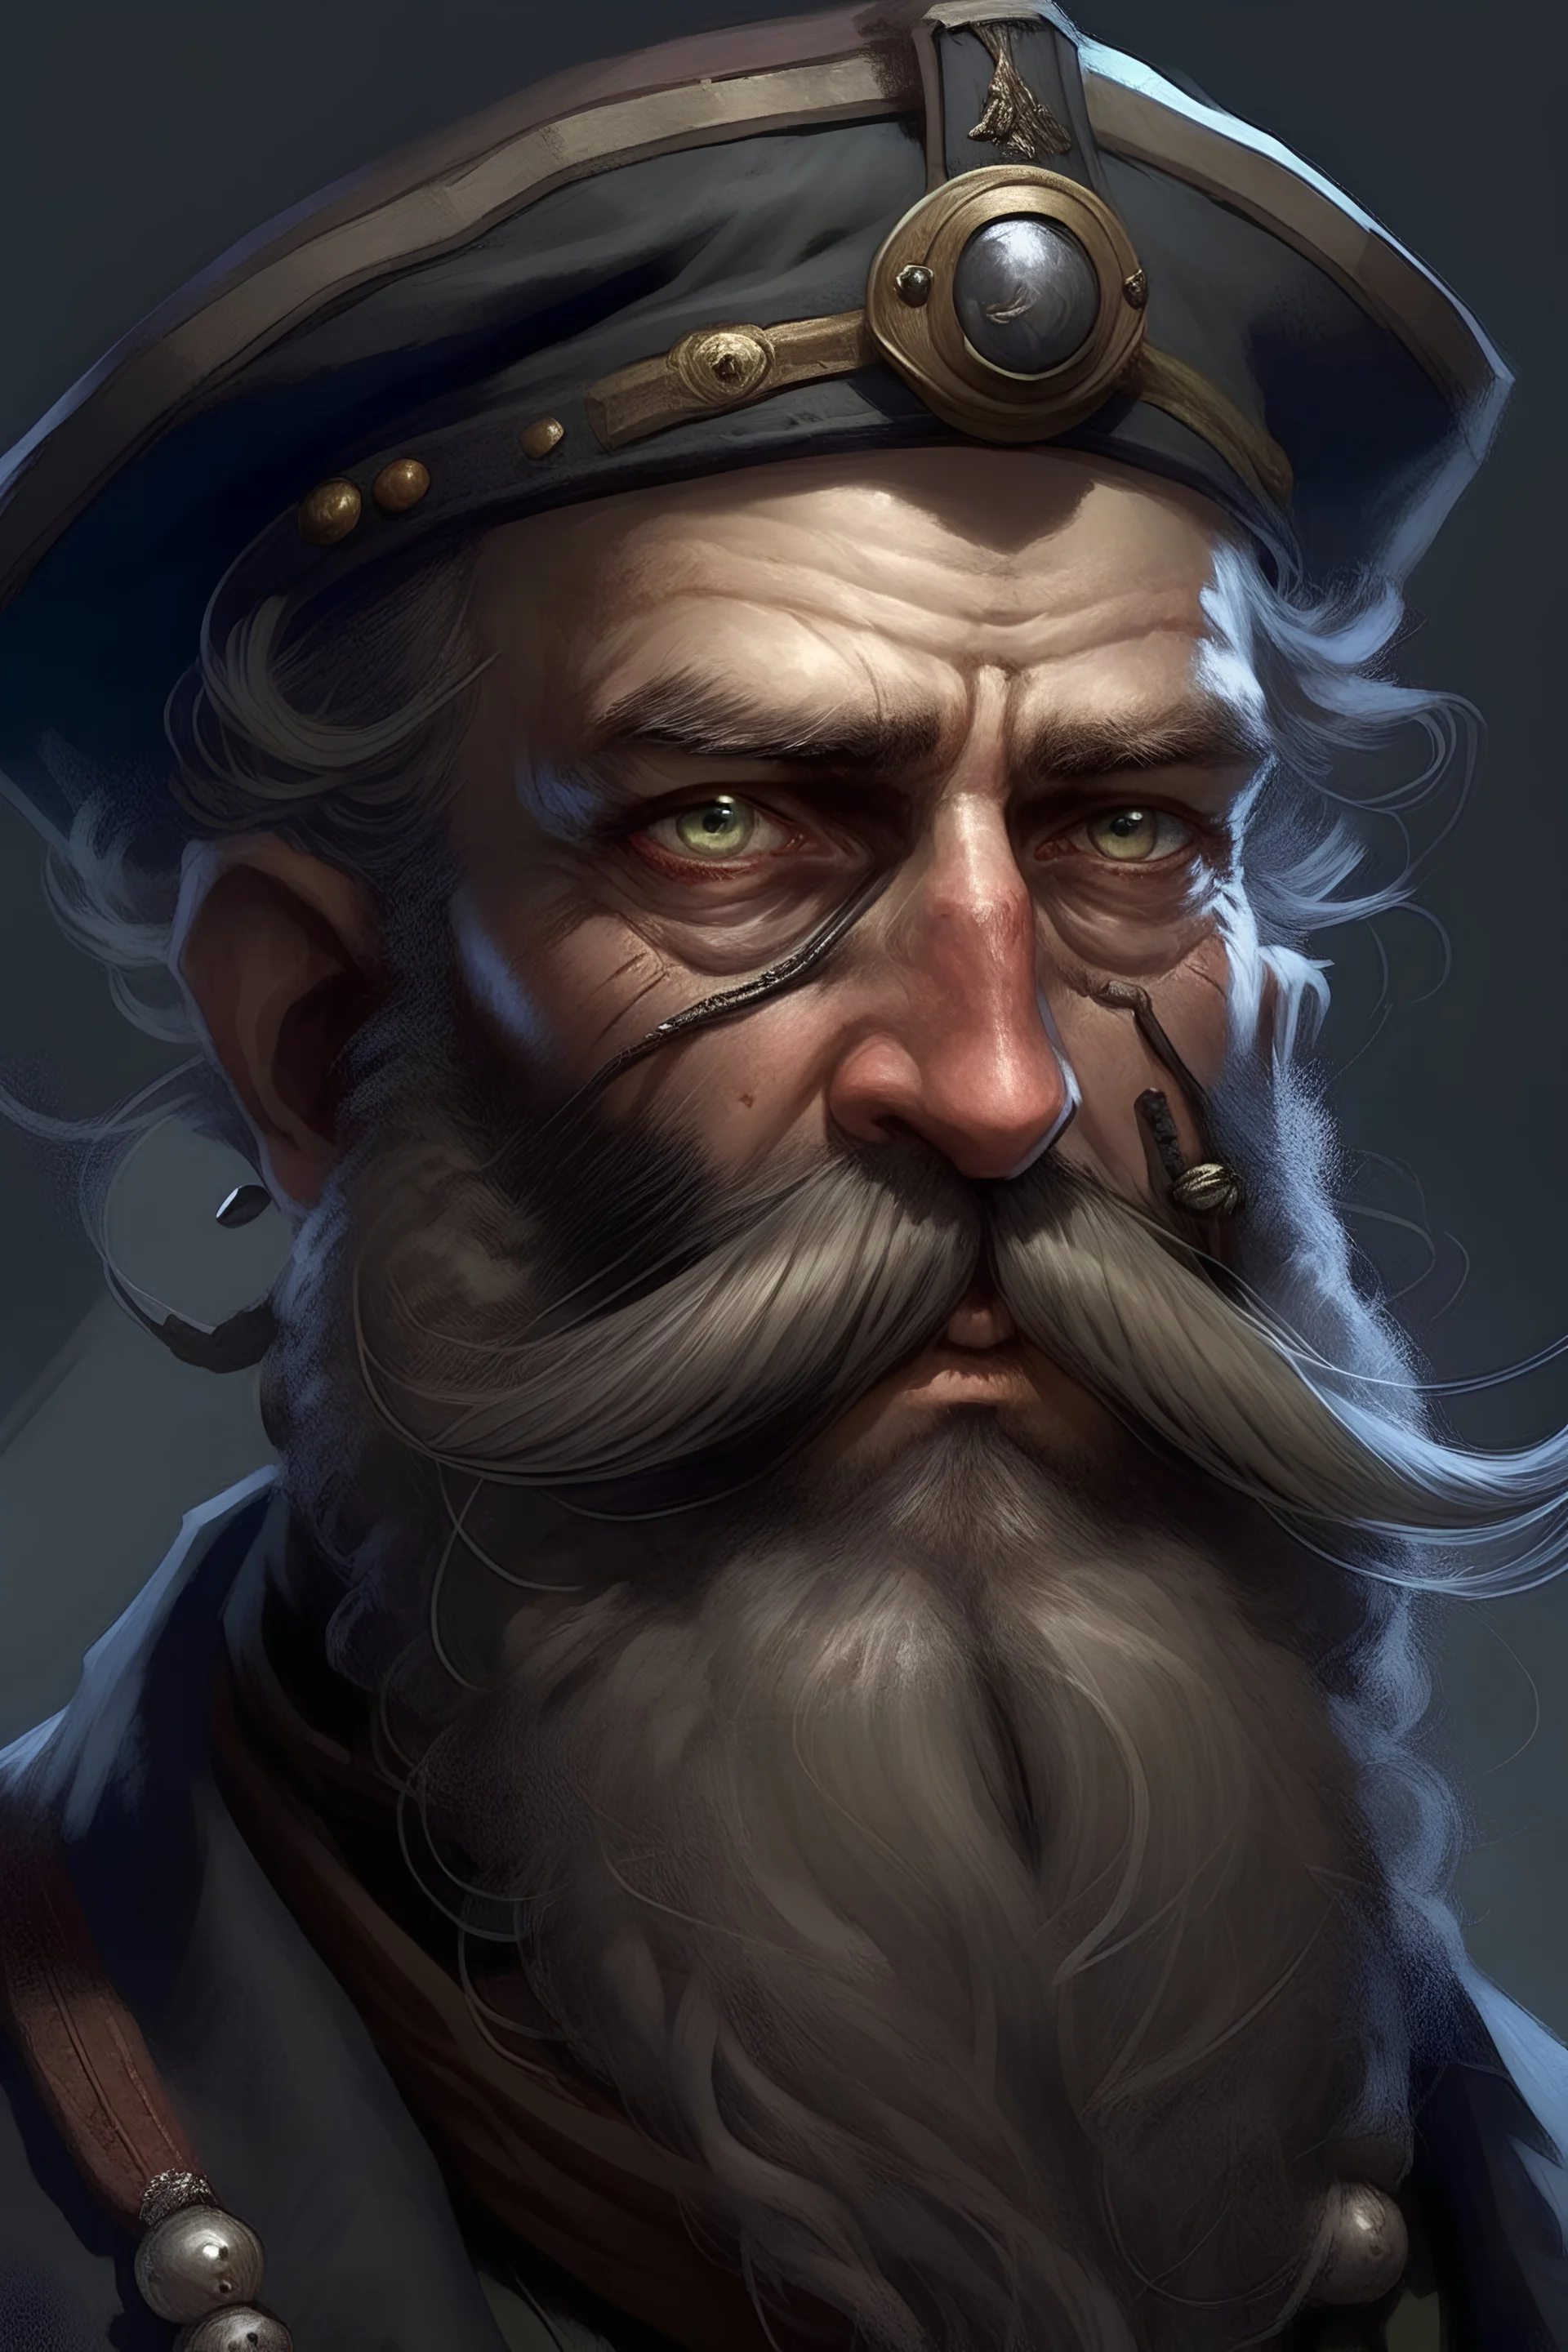 A grizzled cycloptic private captain with a disgusting beard, fantasy, digital art